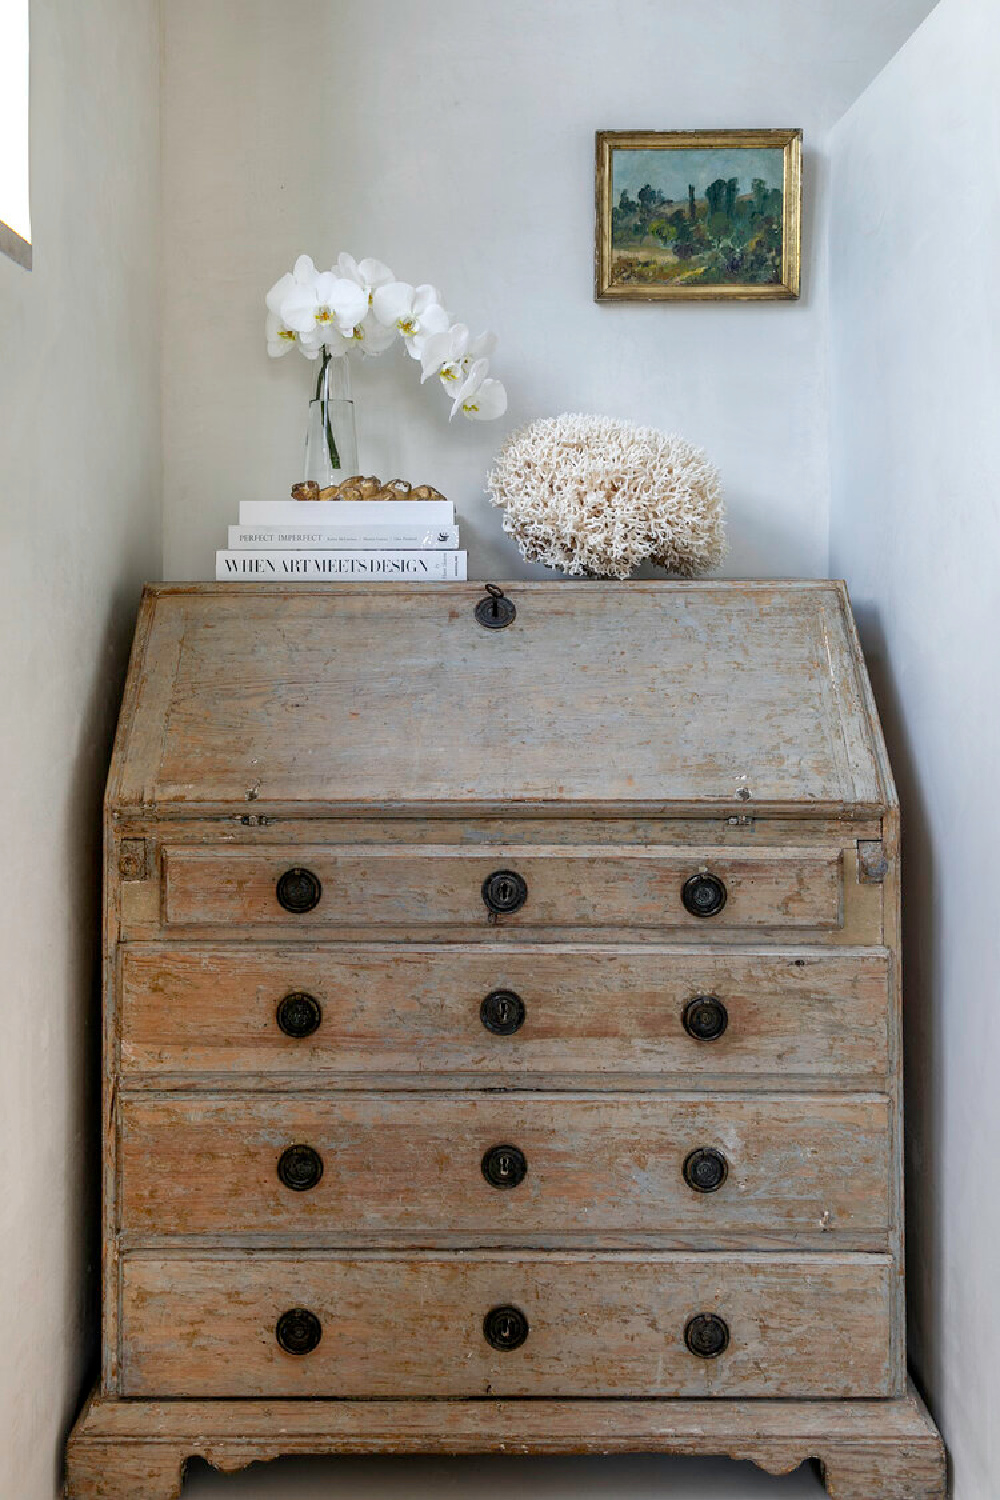 Antique desk in a space designed by Jill Egan. #europeancountry #oldworldstyle